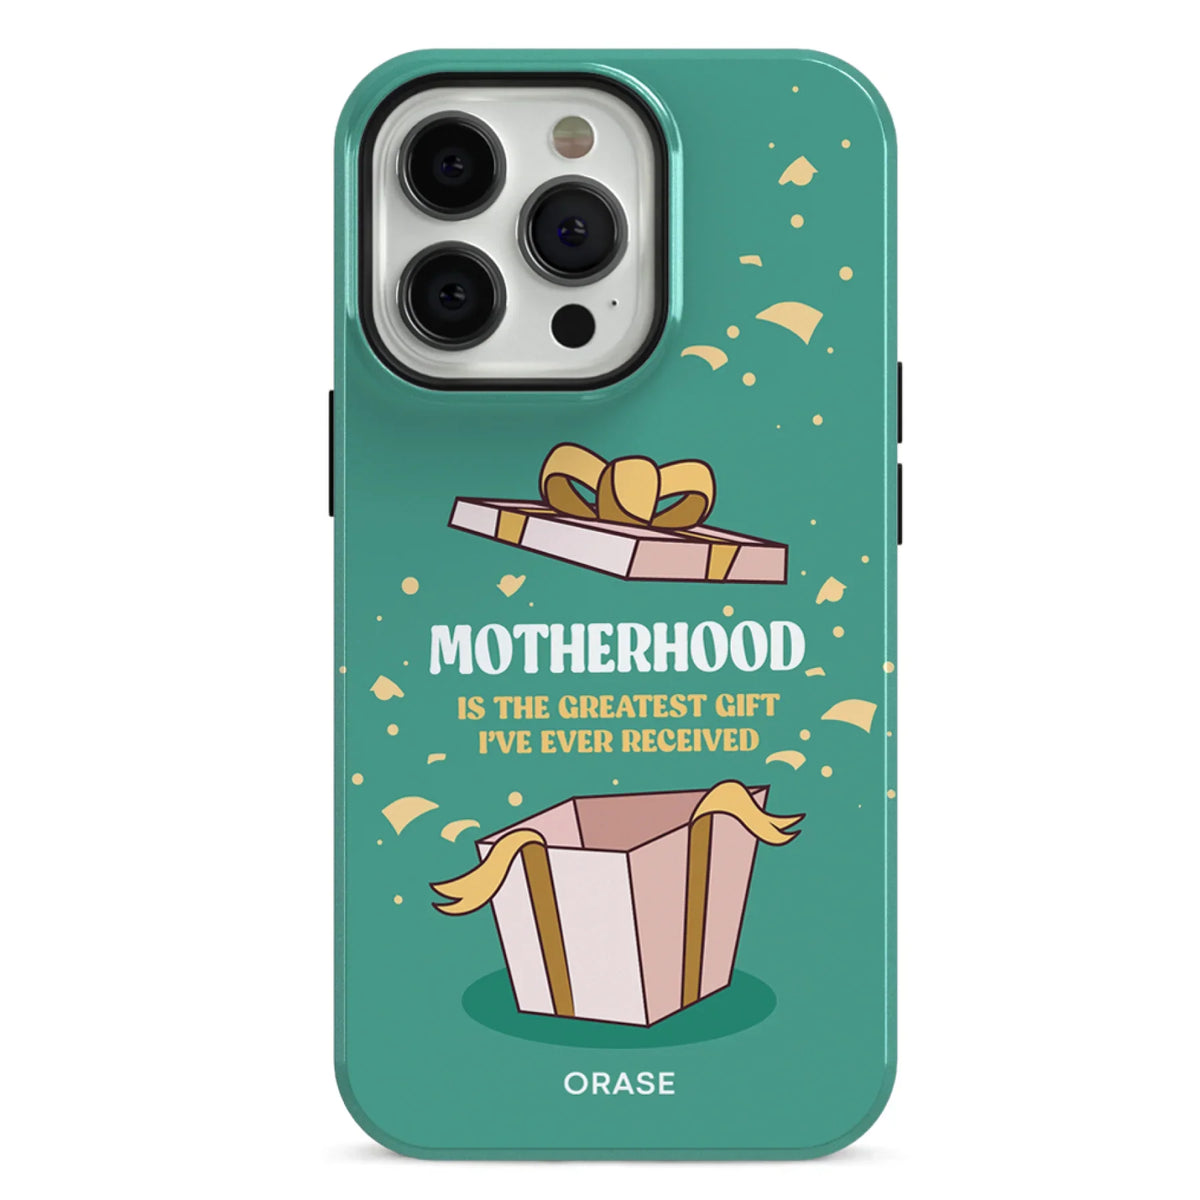 Motherhood Is The Greatest Gift iPhone Case - Select a Device